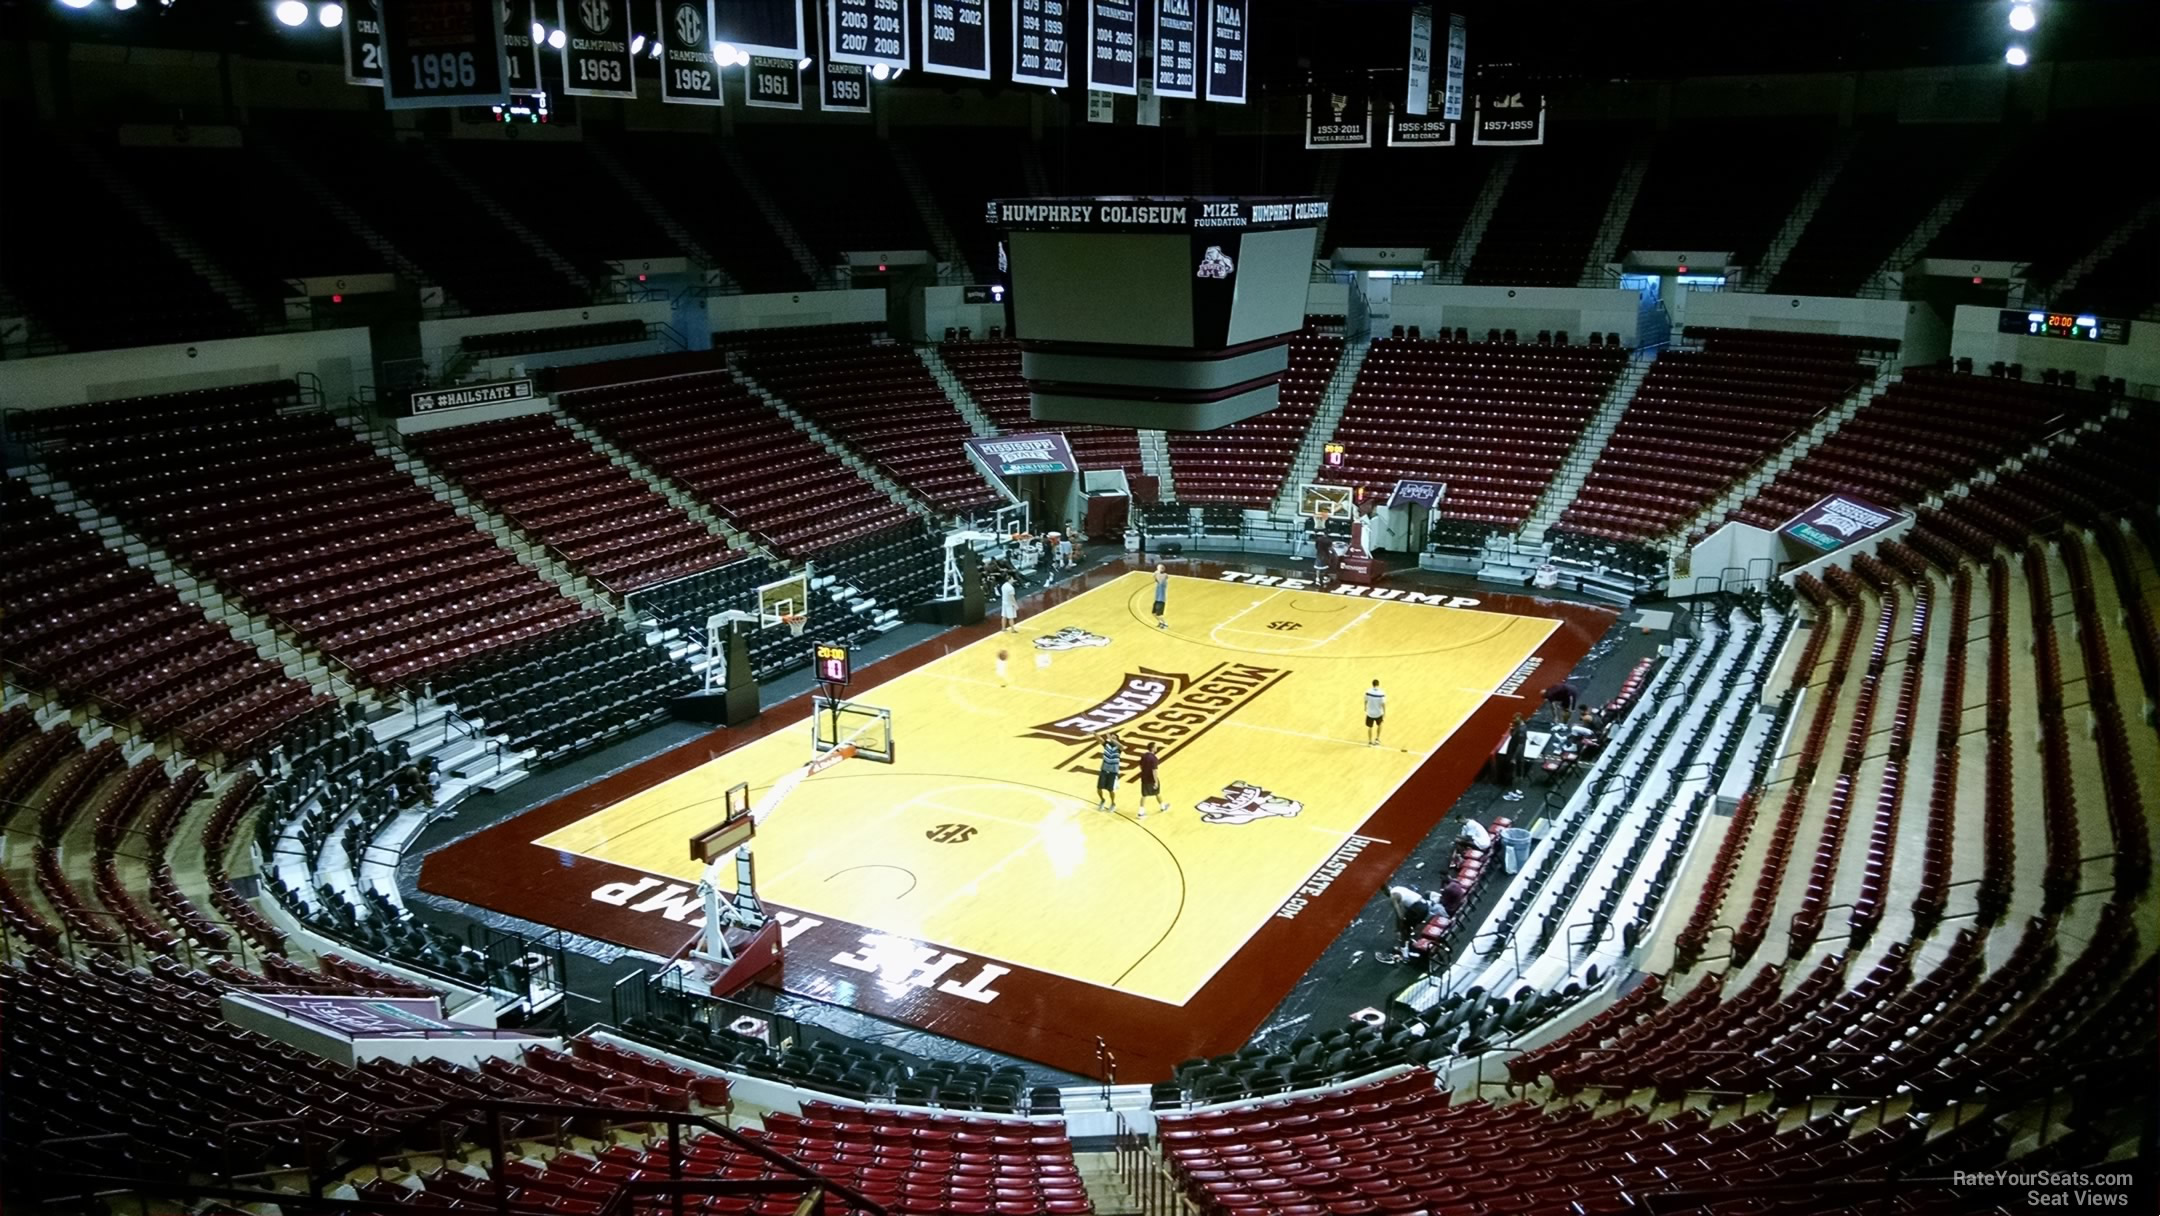 section 234, row 8 seat view  - humphrey coliseum